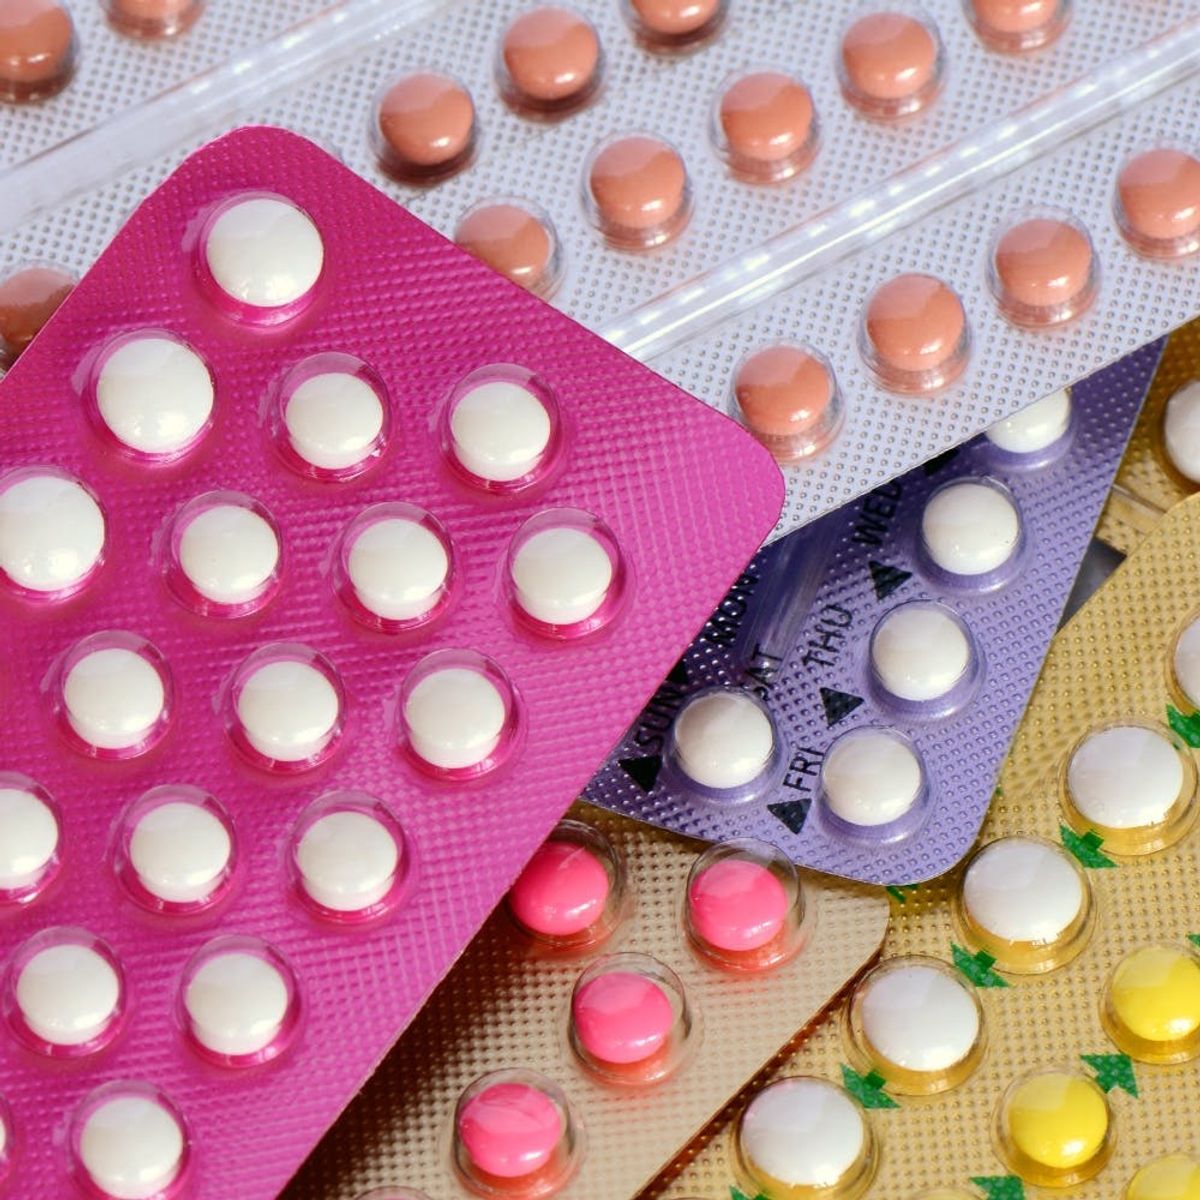 10 Health Reasons Women Use Birth Control That Have Nothing to Do With Pregnancy